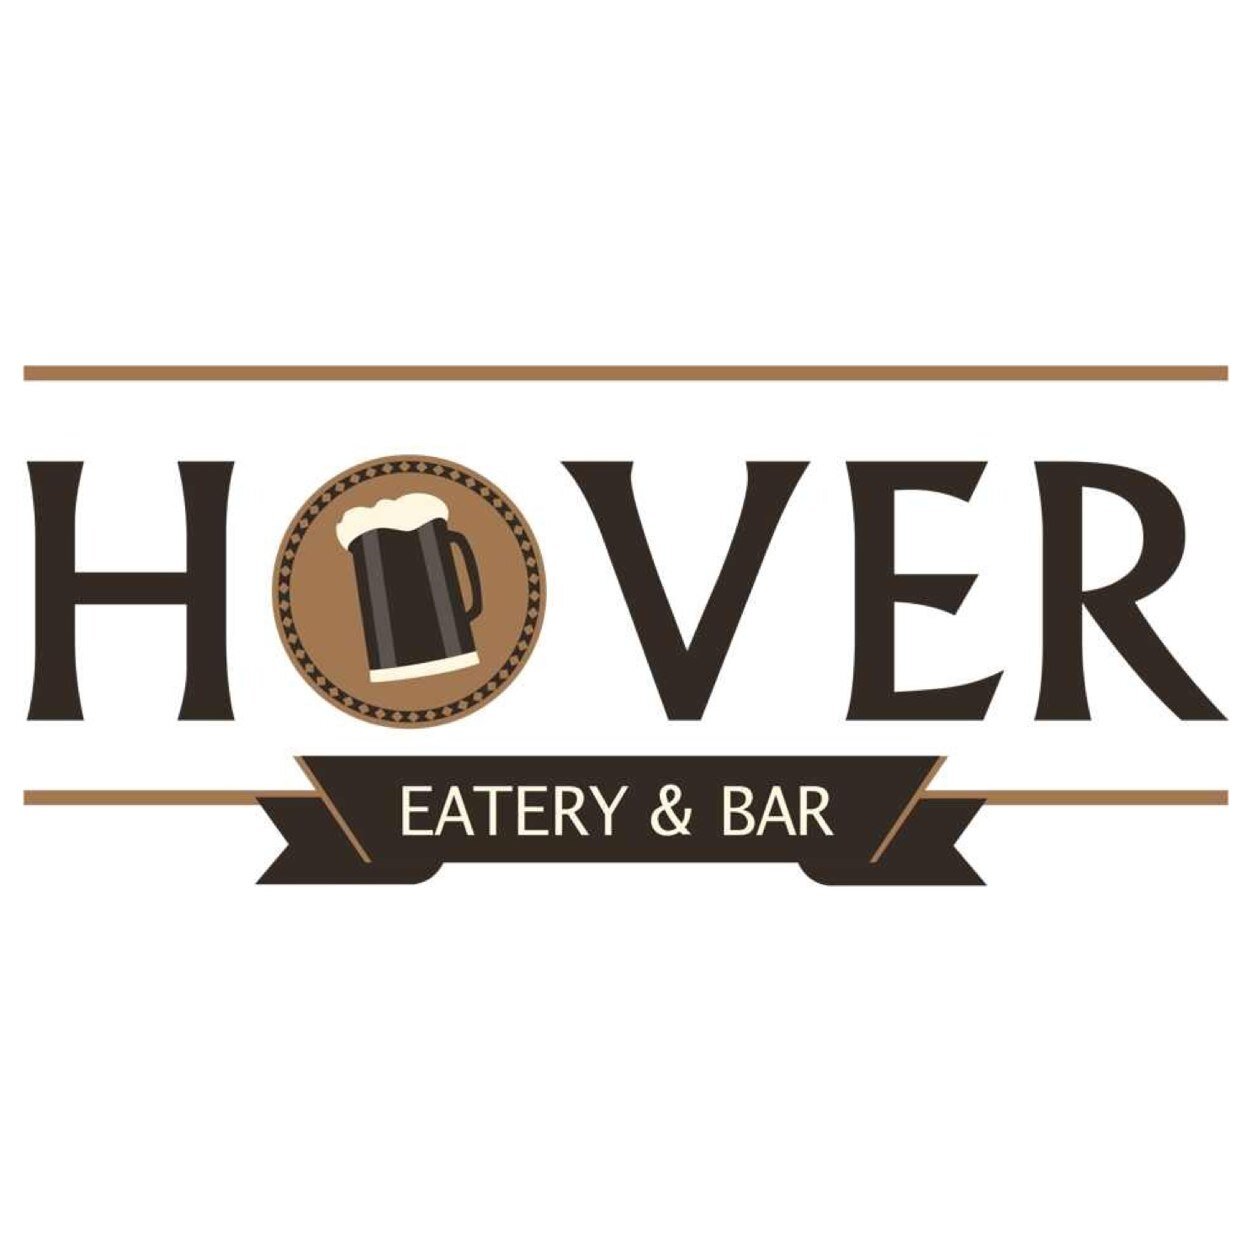 HOVER eatery&bar